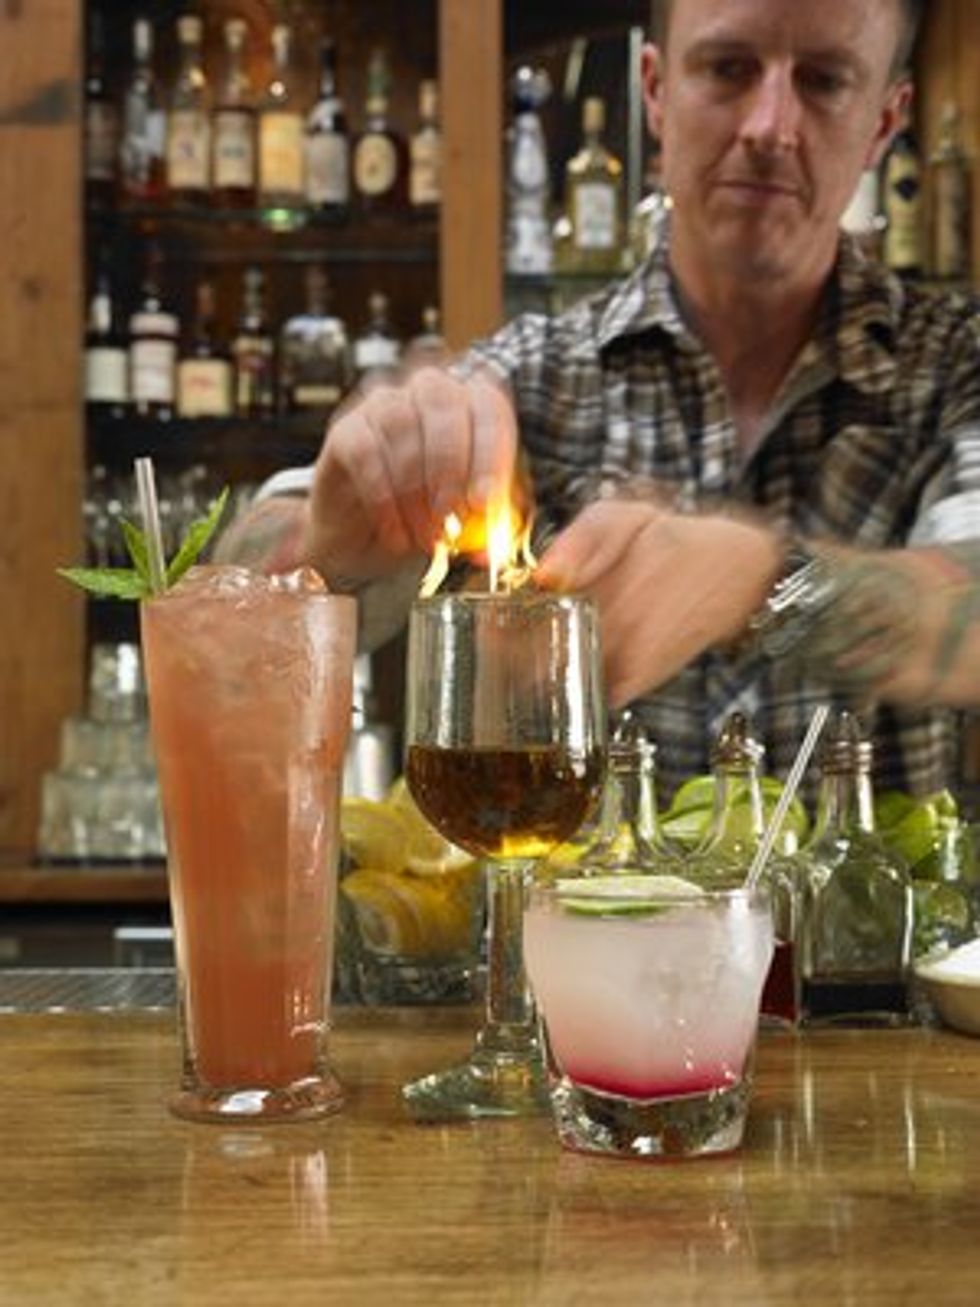 Smoky Sips: Where to Find the City’s Best Mezcal Drinks